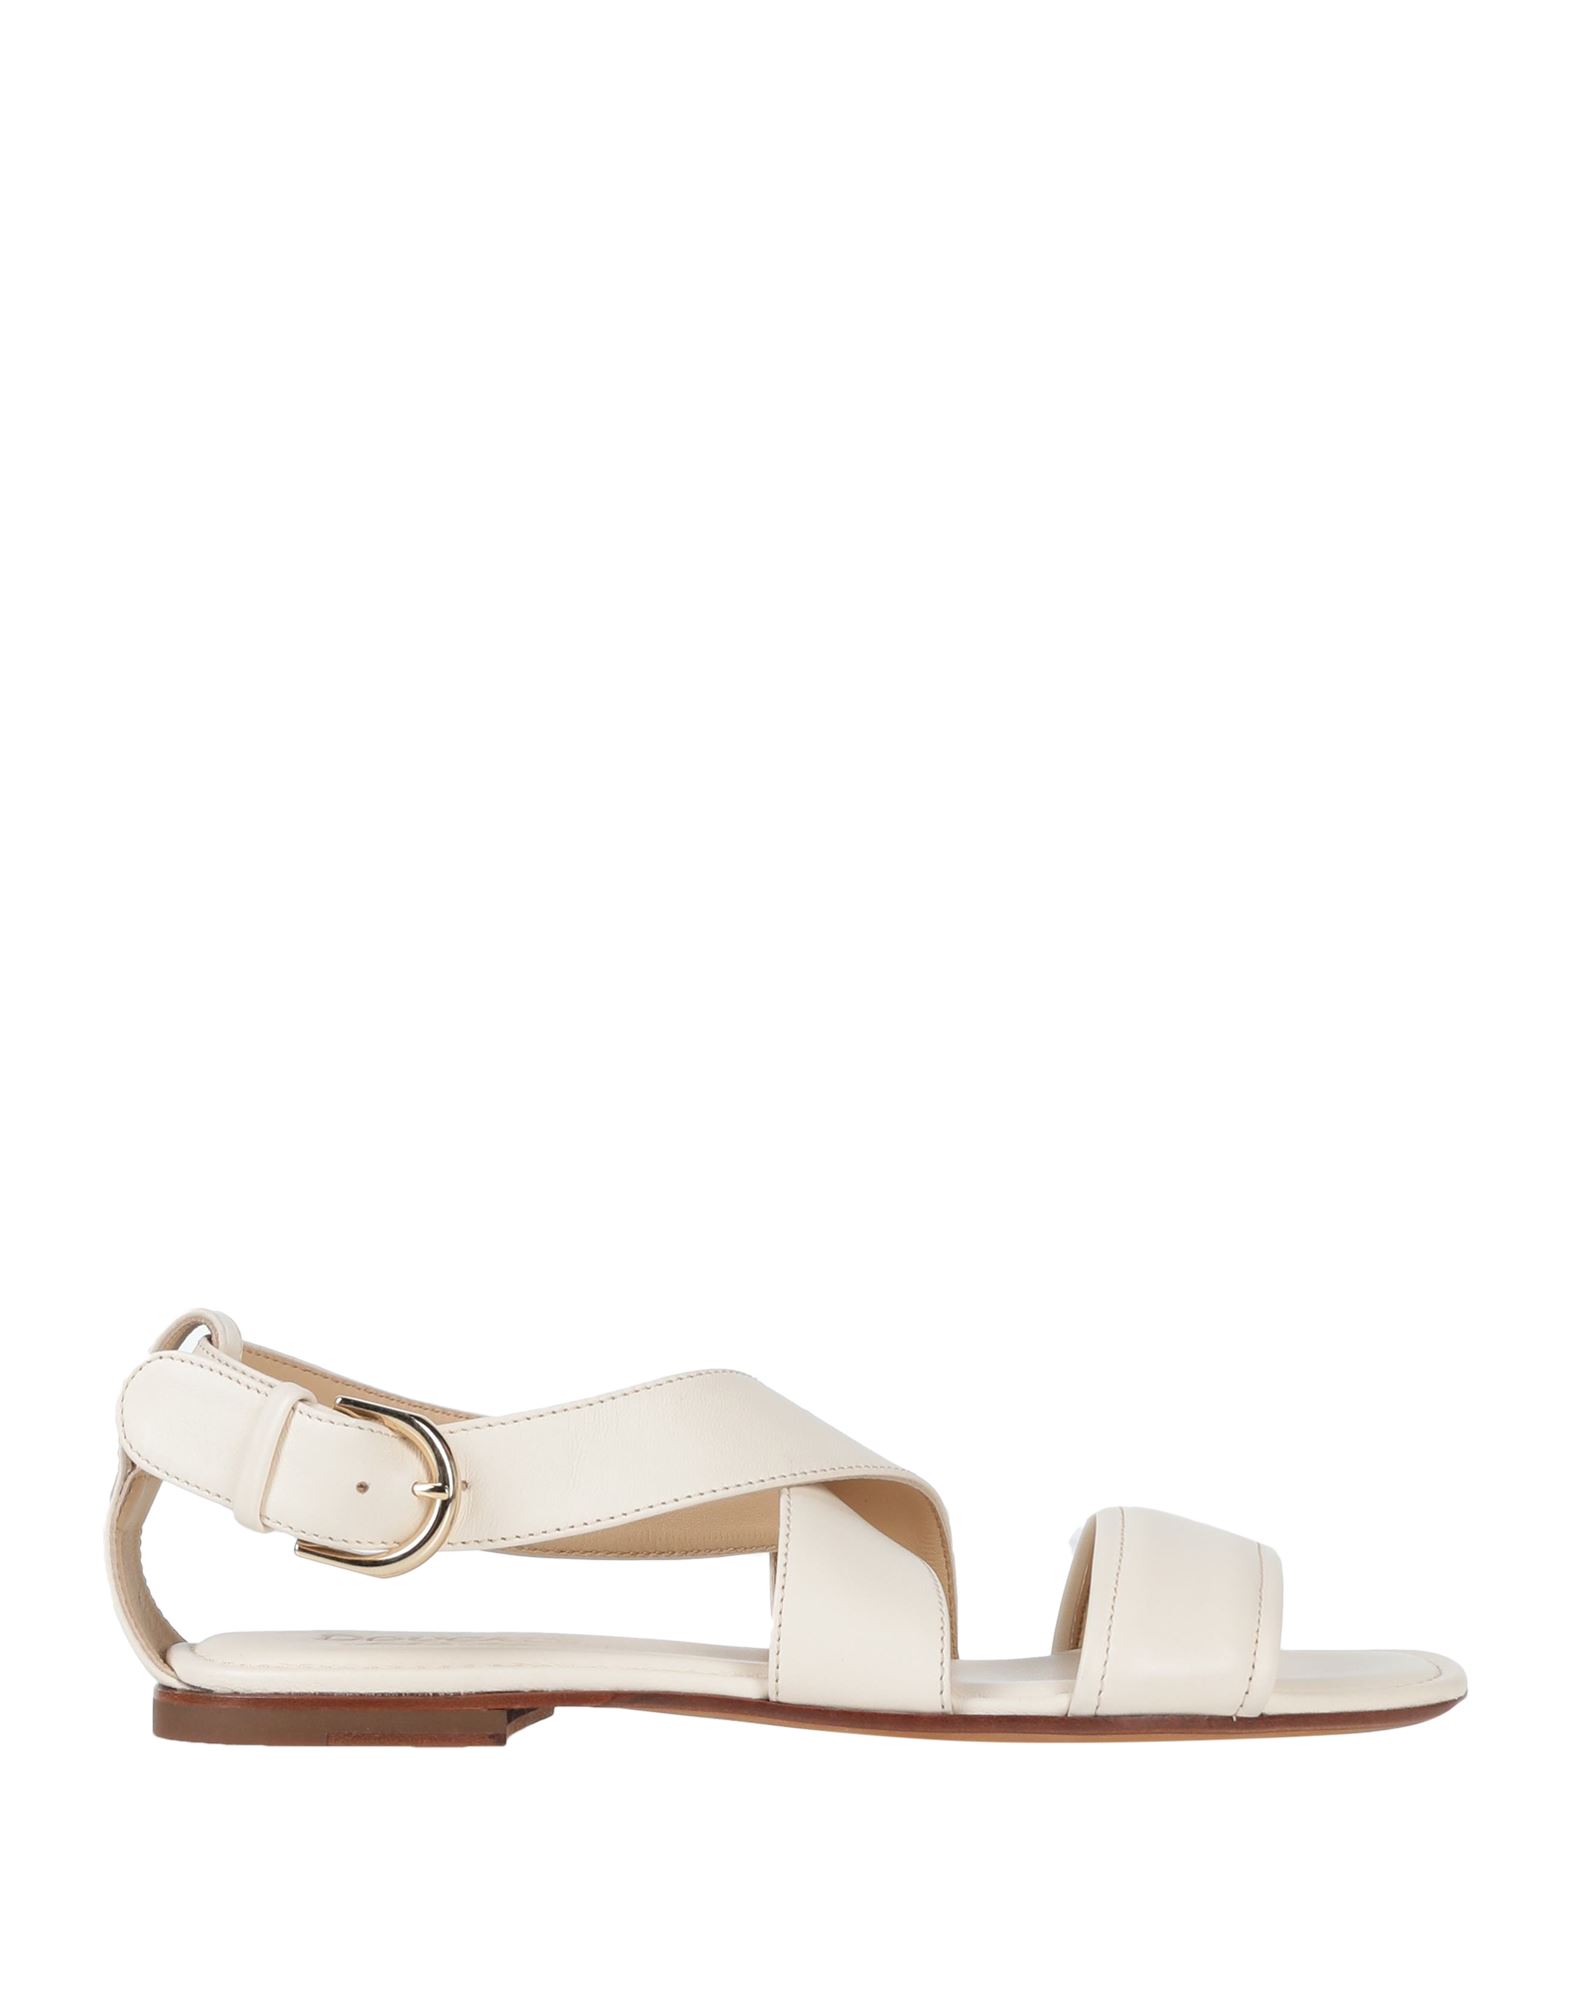 Doucal's Woman Sandals Ivory Size 7 Soft Leather In White